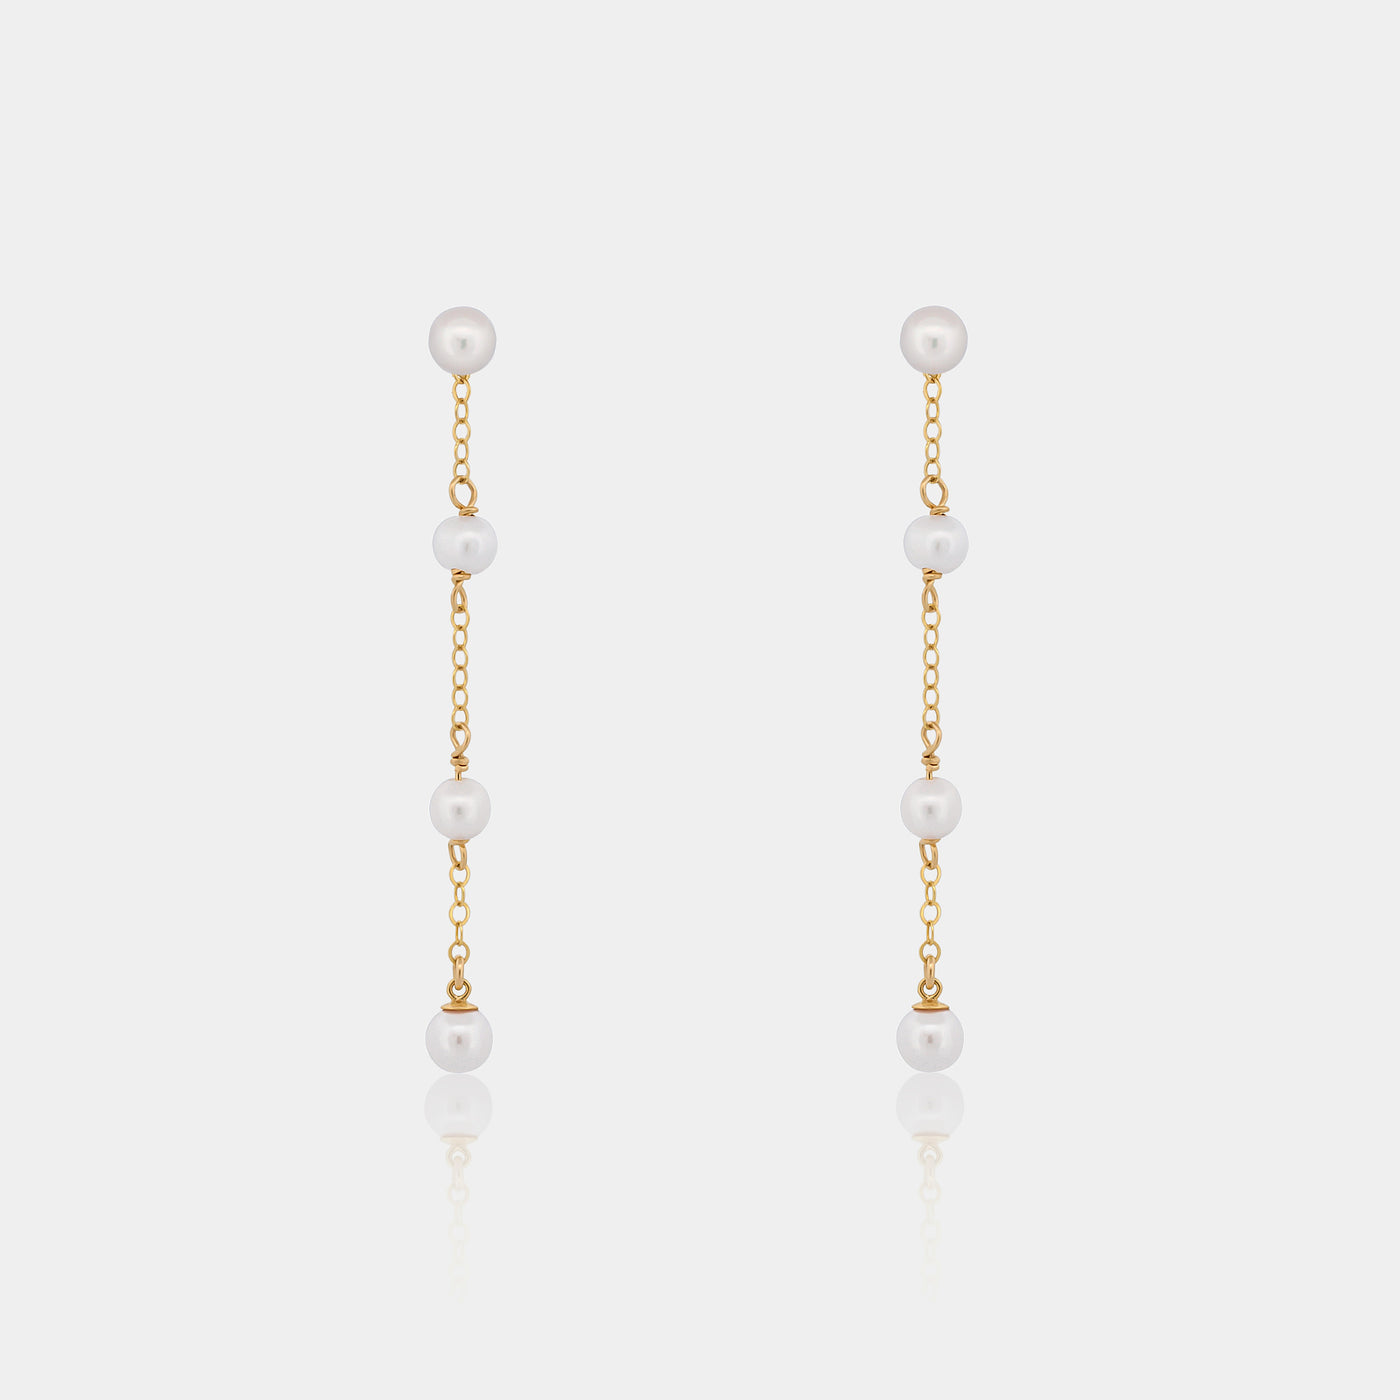 Satellite pearl drop earrings with 14k gold filled chain